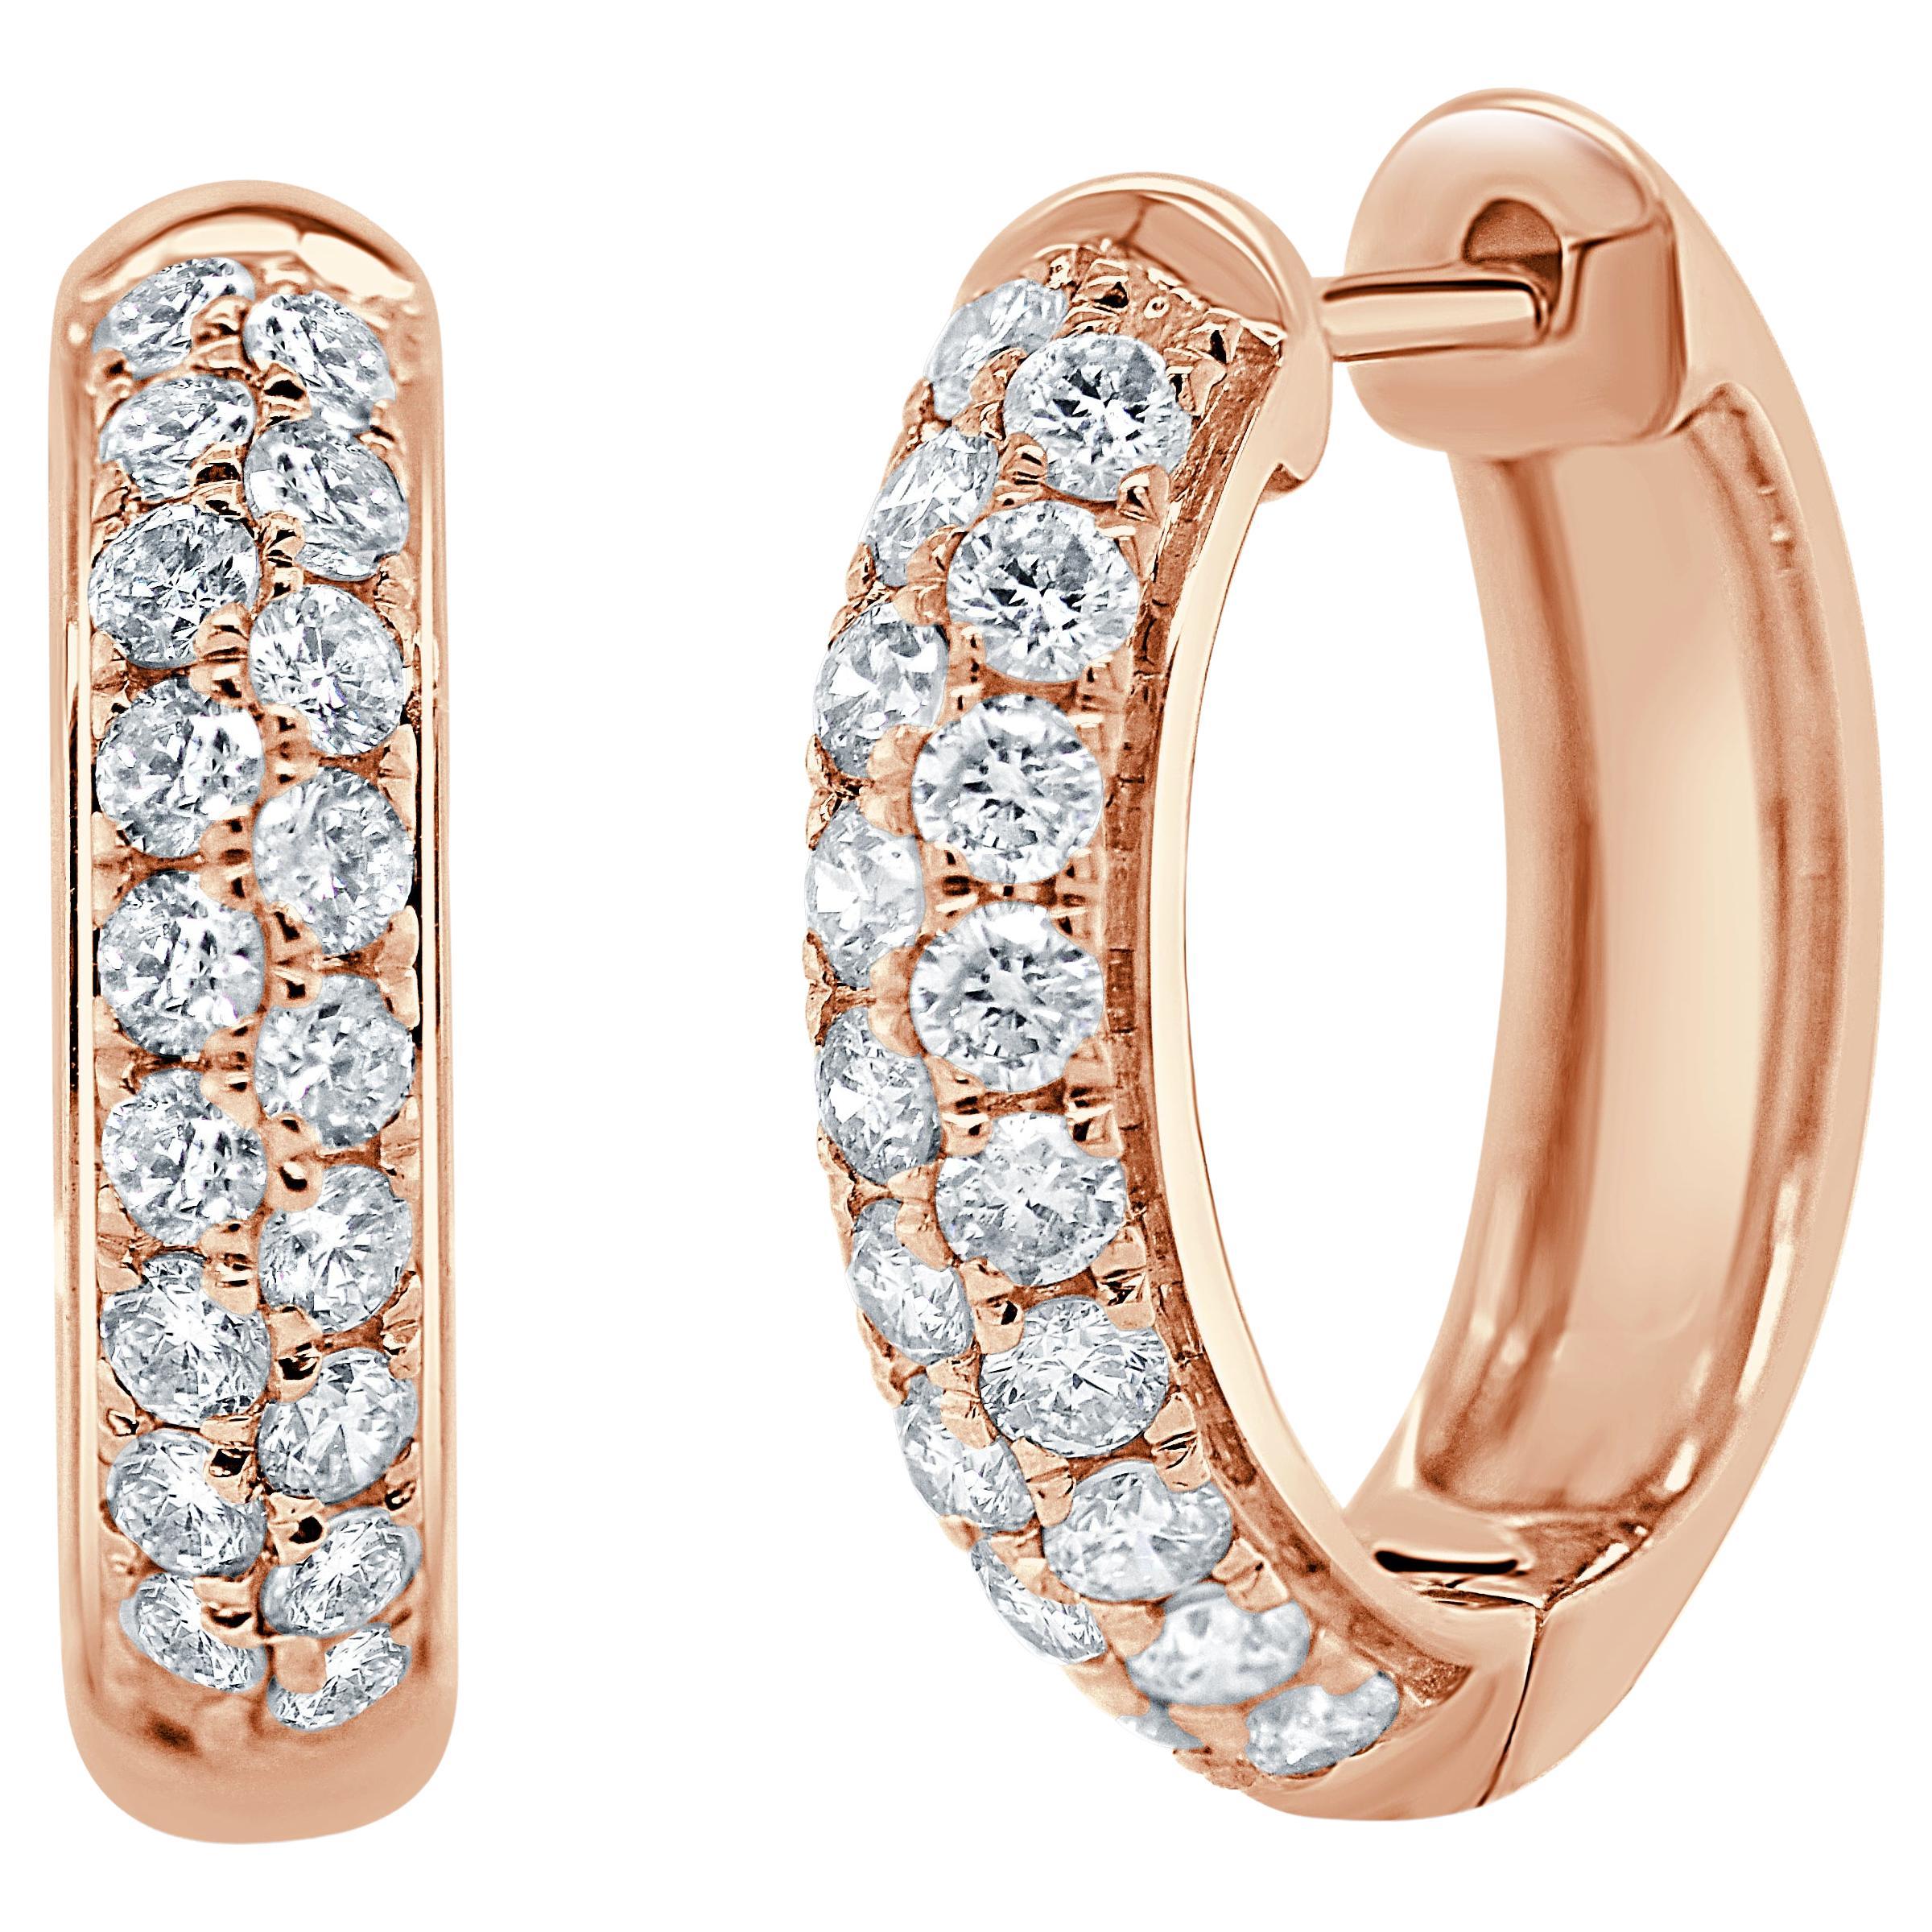 14K Rose Gold 0.65ct Diamond Double Row Earrings for Her